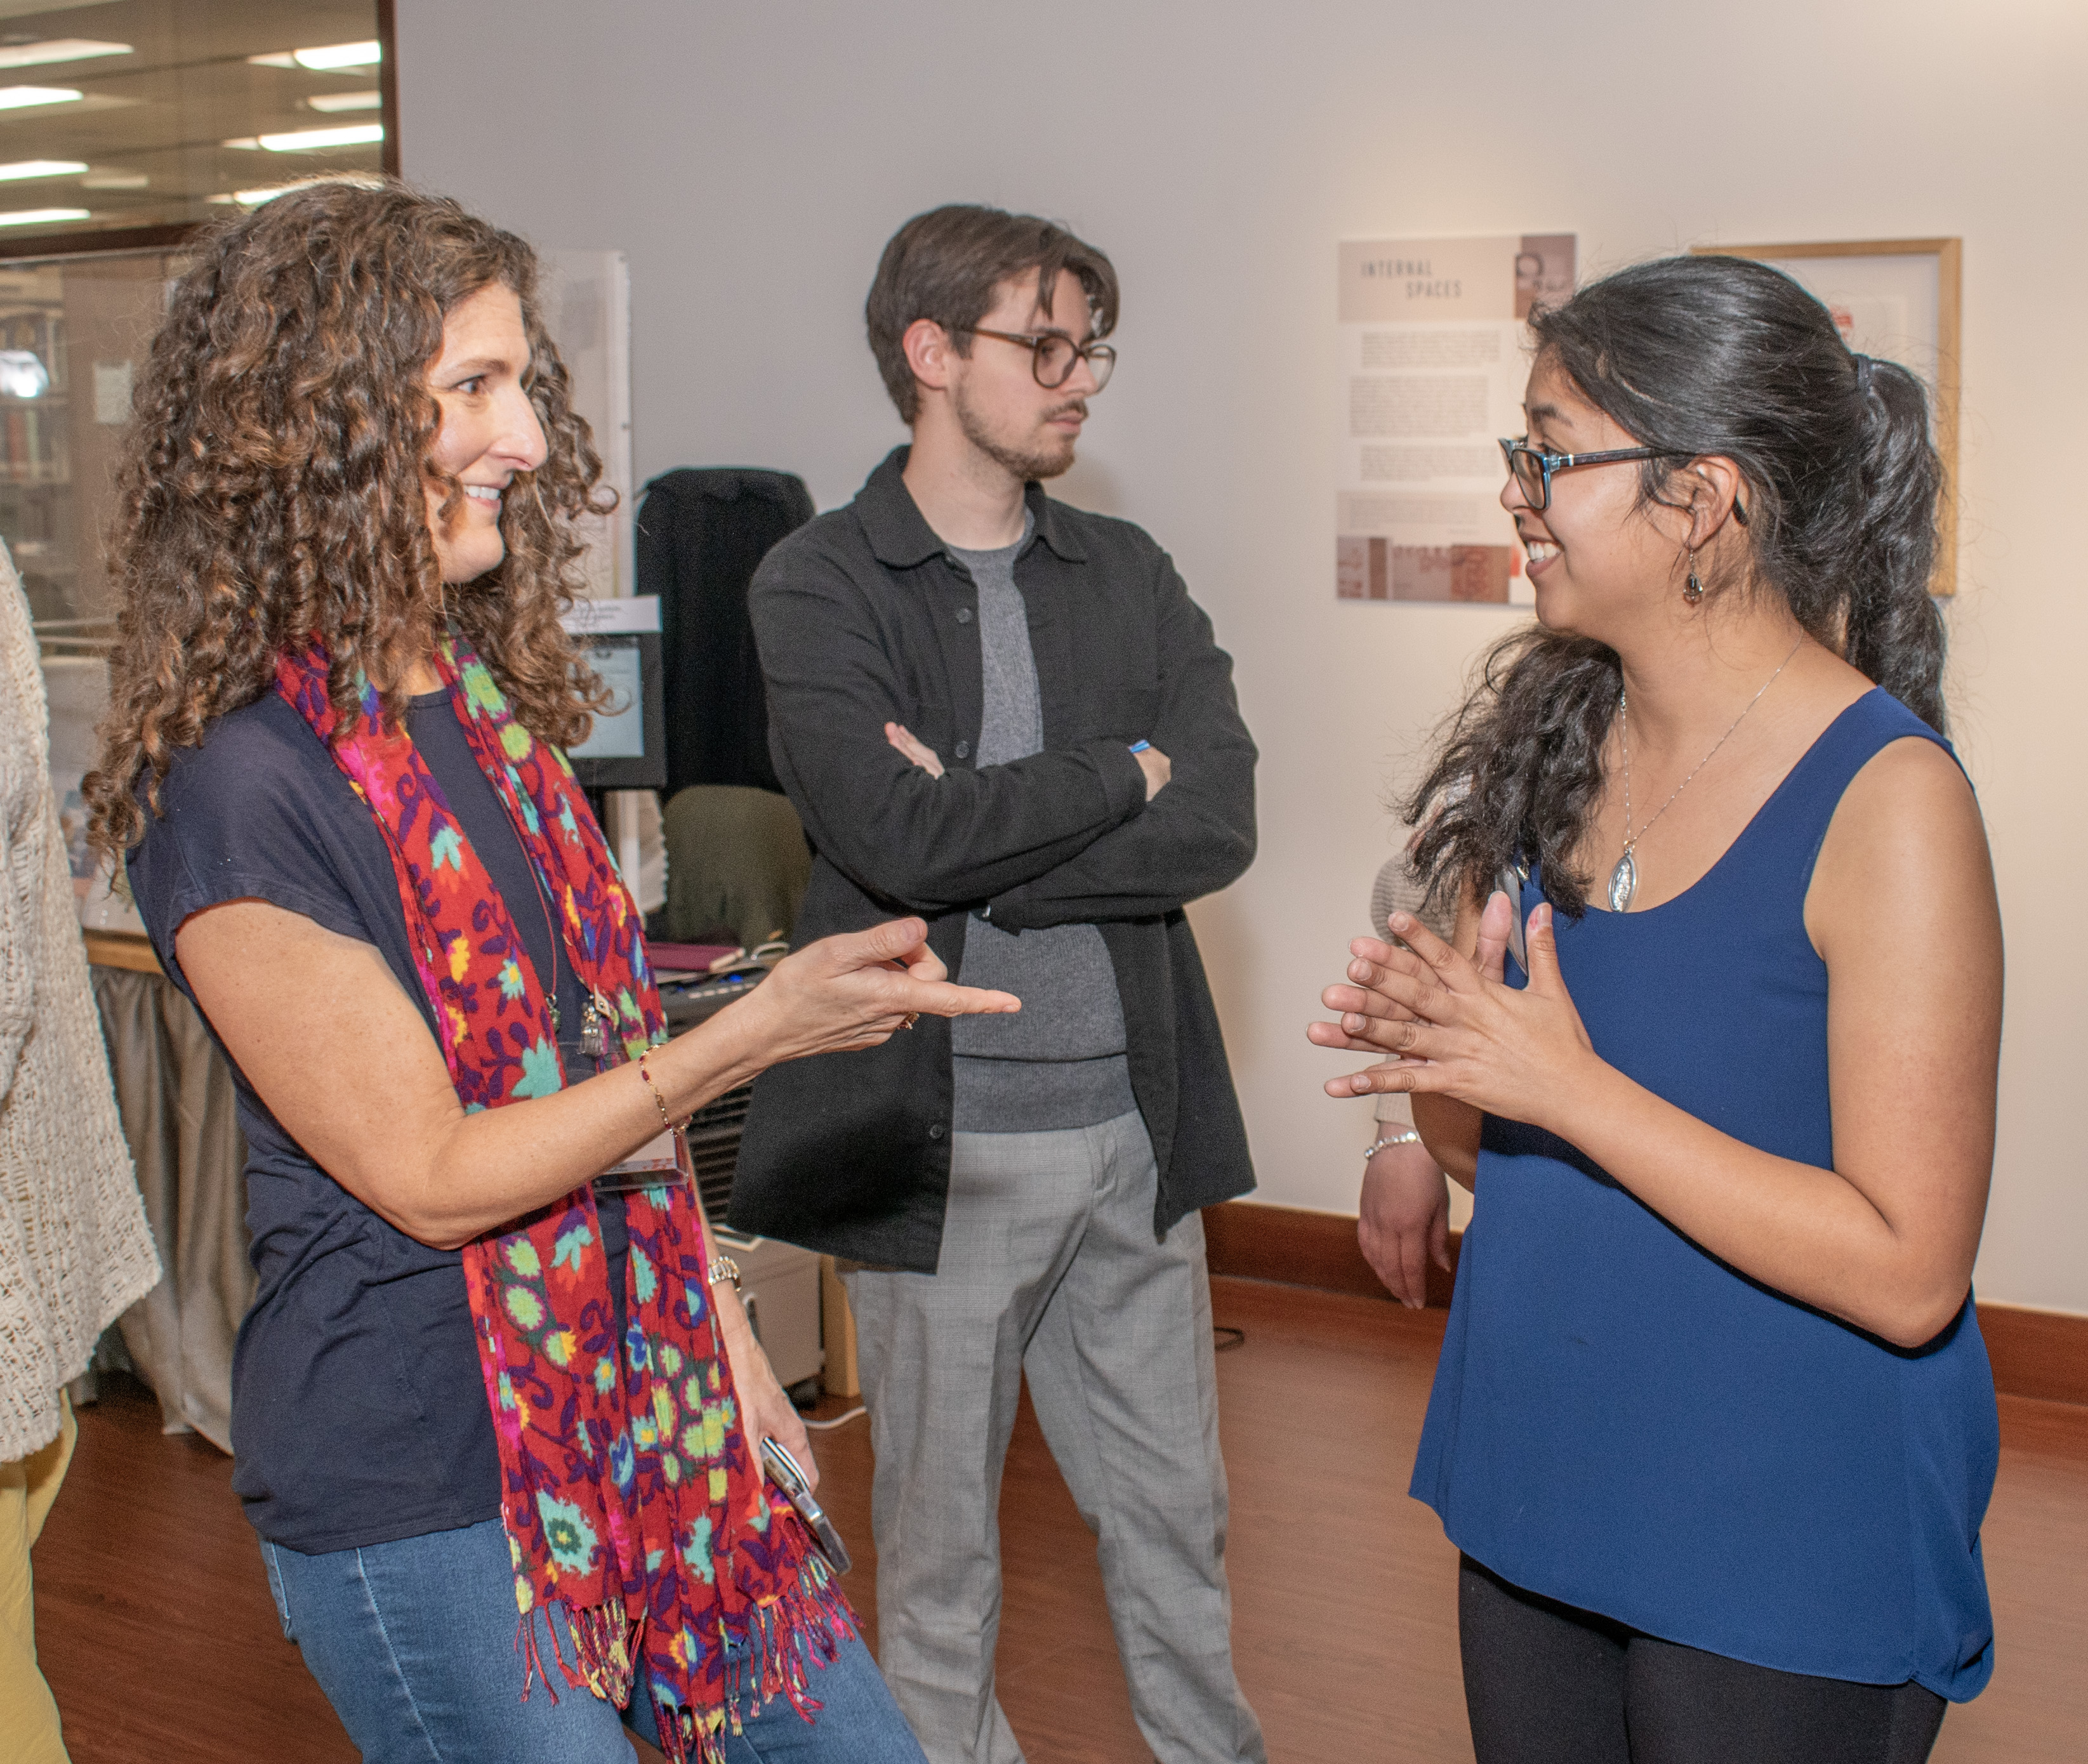 A photograph of Sarah Meyer conversing with one of the gallery staff members about the exhibition.